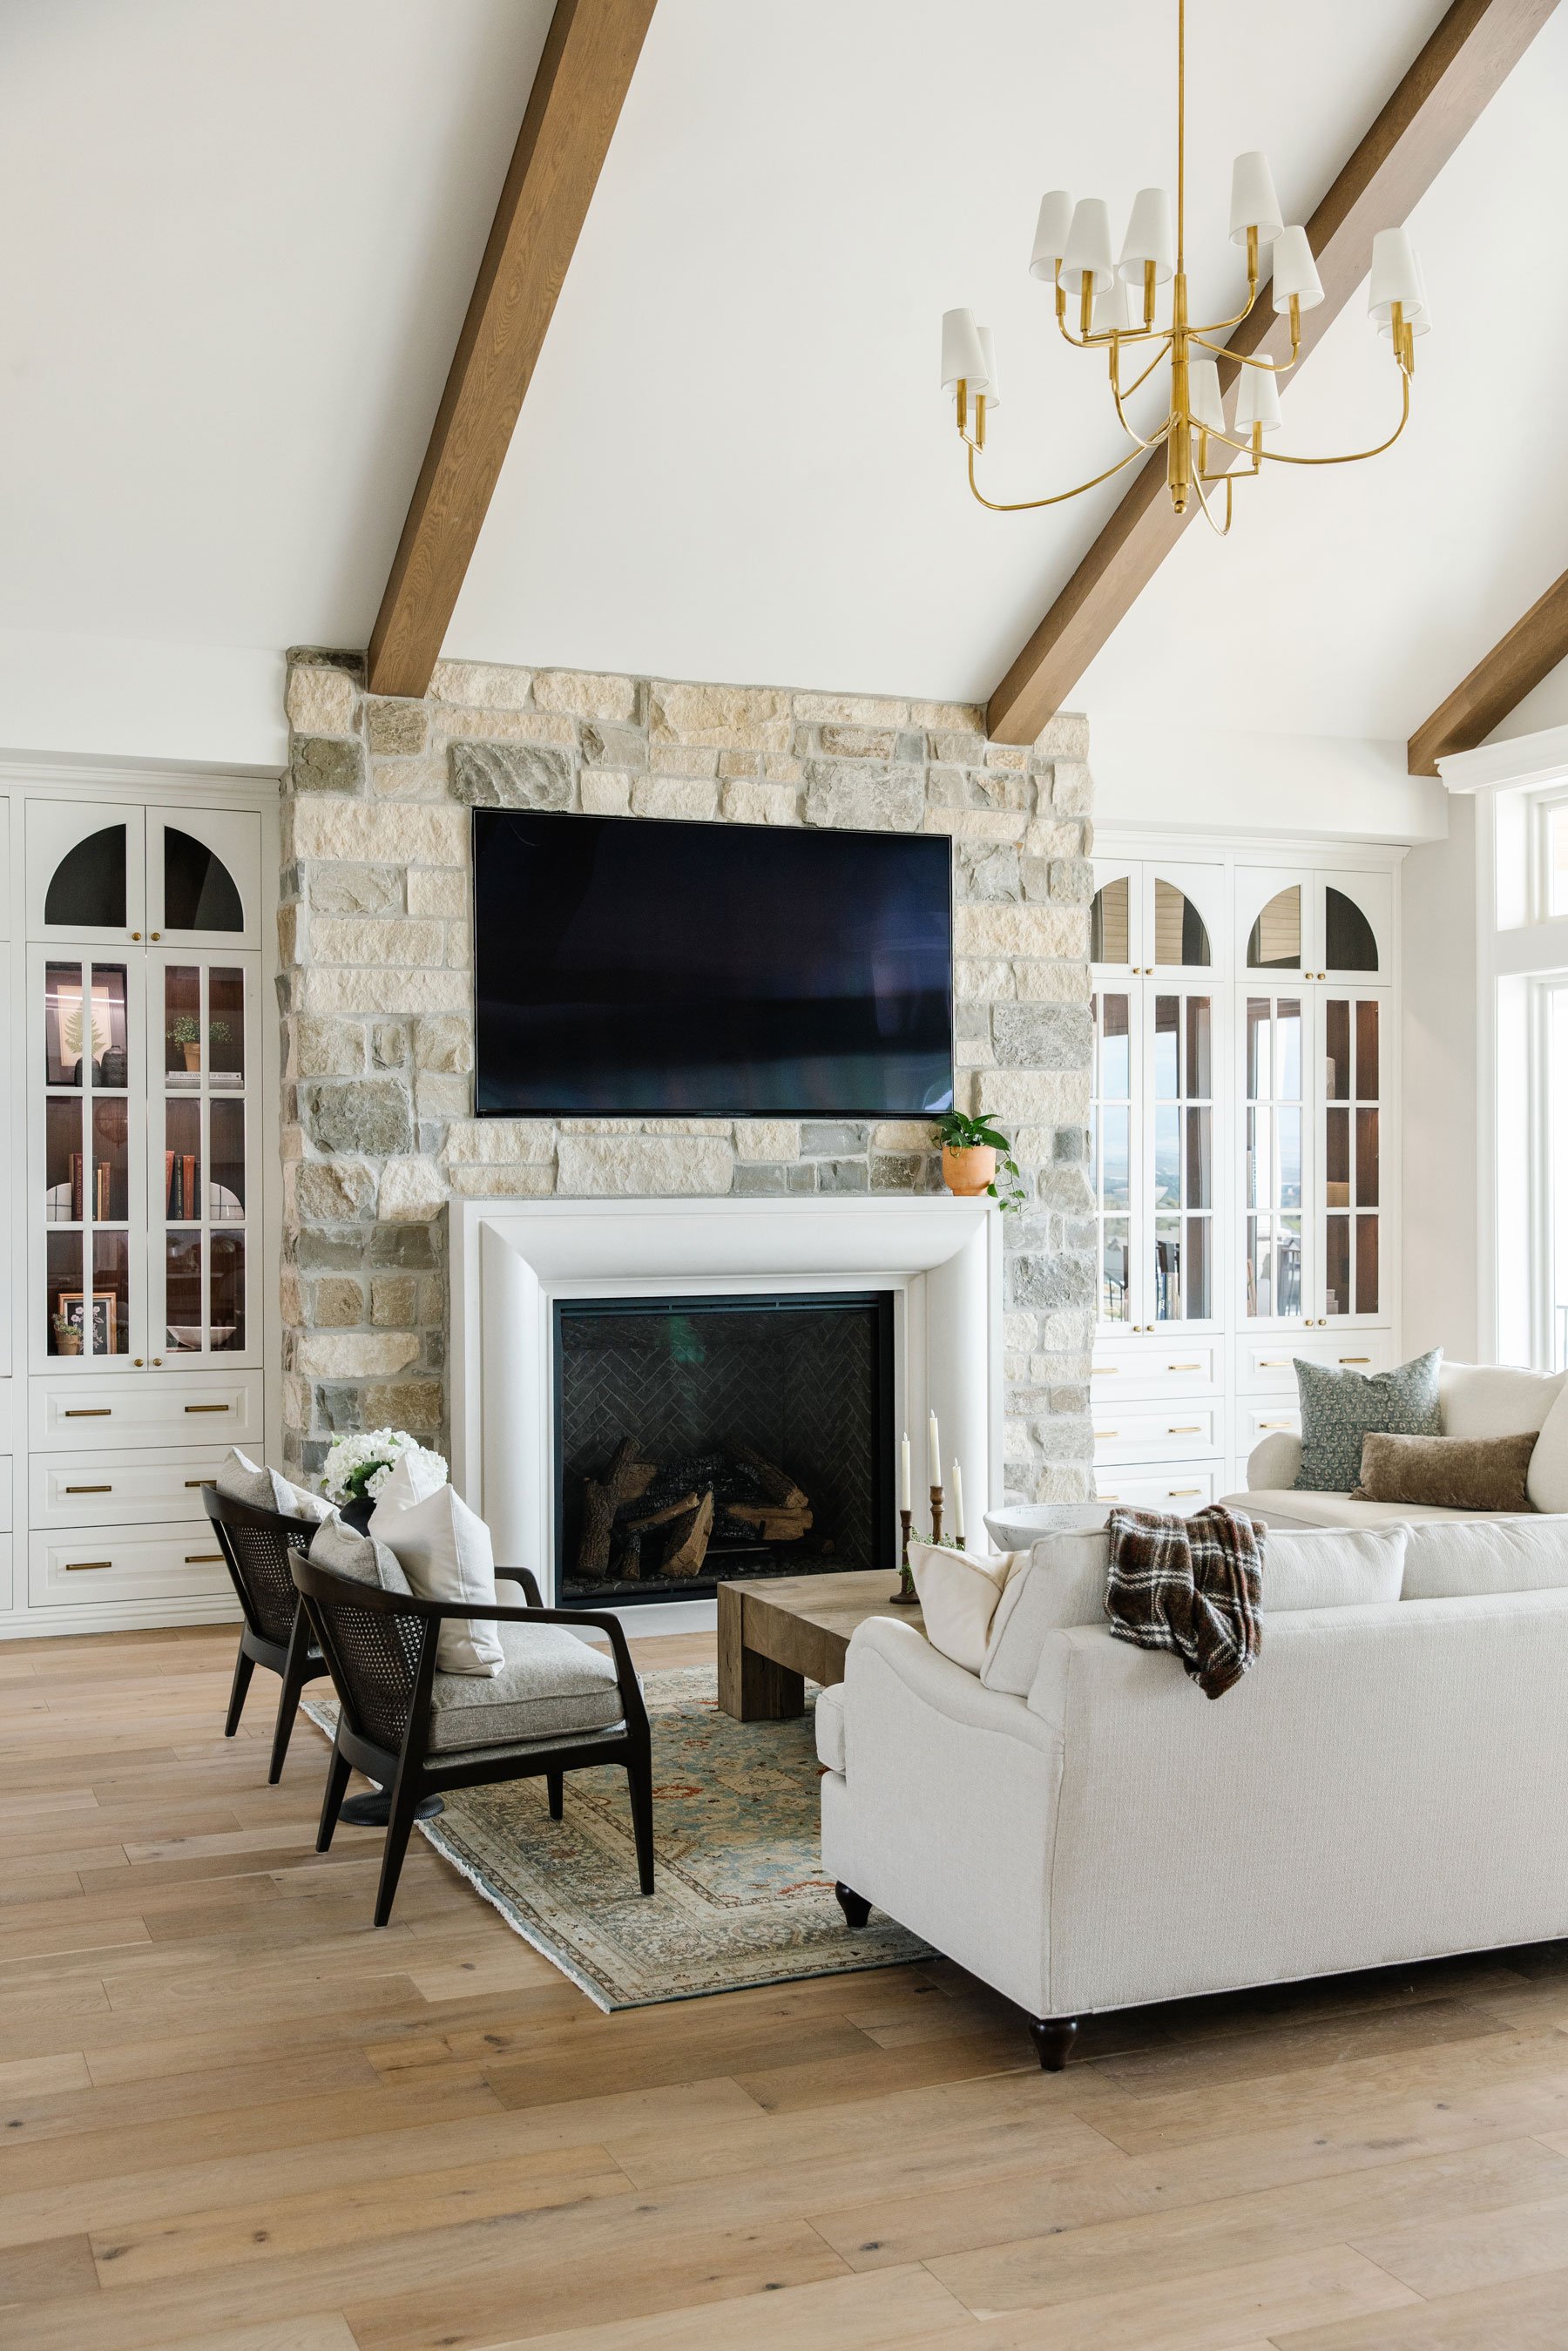  Liz Powell Design specializes in building their clients classic, timeless homes that will grow with their families over the years. #LizPowellDesign #InteriorDesigner #InteriorDesignUtah #buildingahome #NorthernUtahHomeDesigner #dreamhome #interiors 